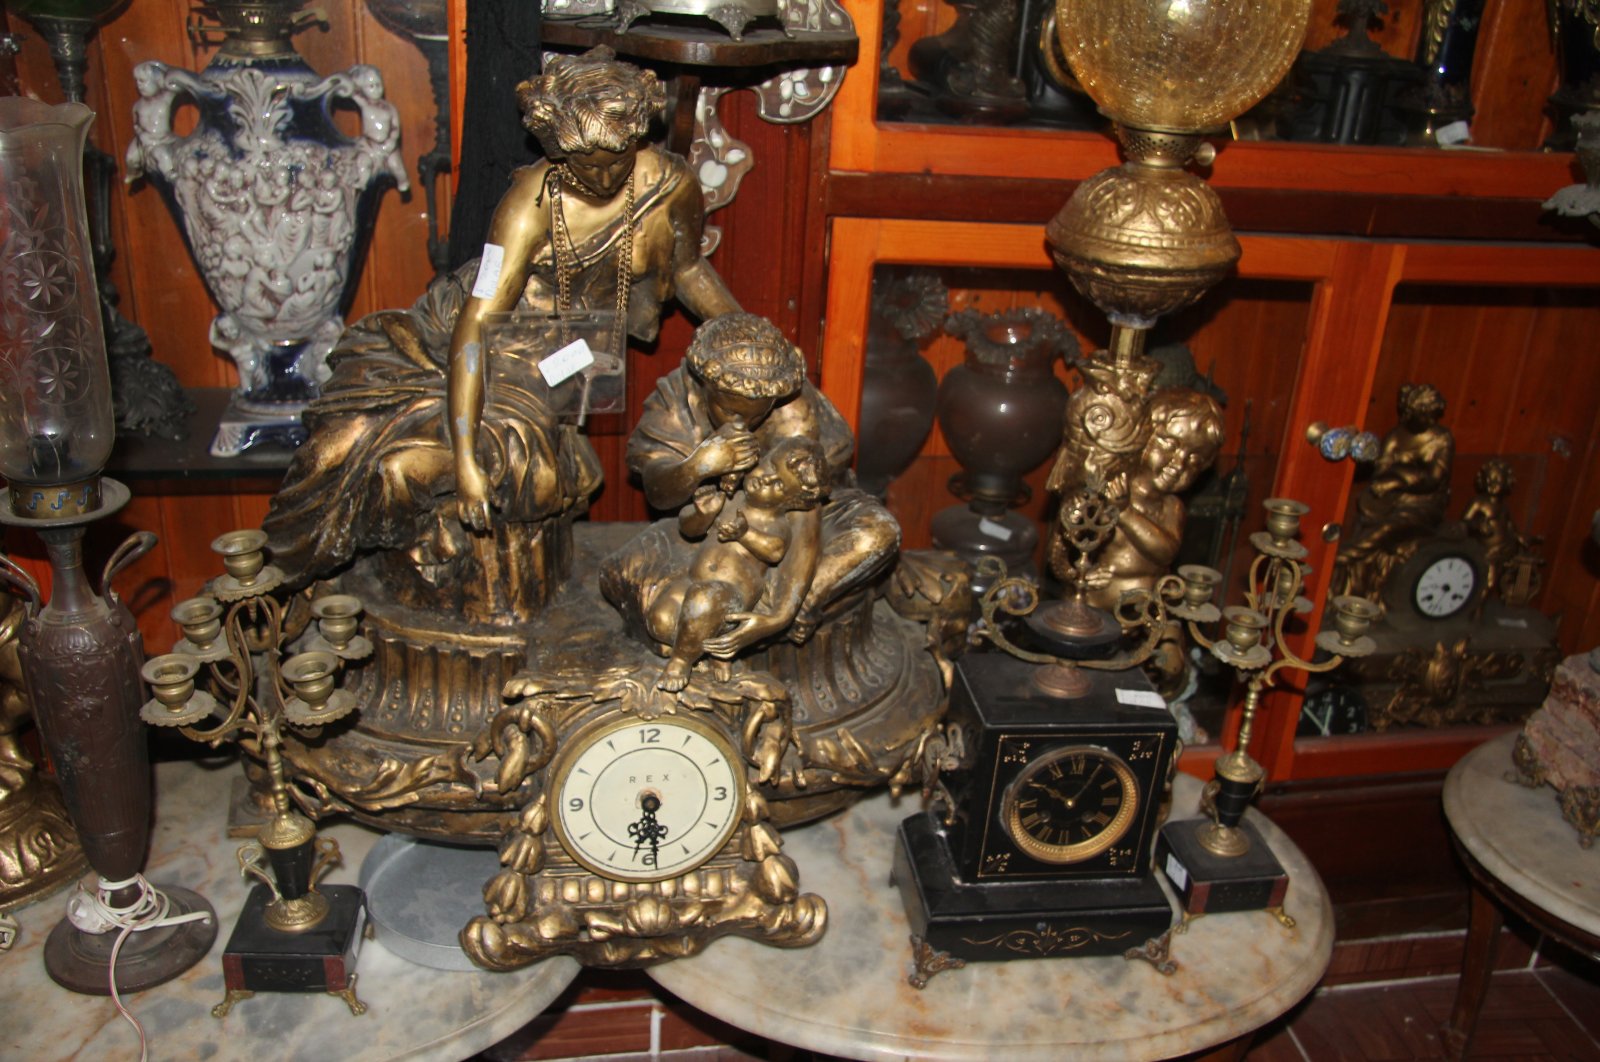 The clocks are displayed in the collection of the Gaziantep Özaslan Antique Exhibition Palace, Gaziantep, Turkey, April 5, 2022. (IHA Photo)